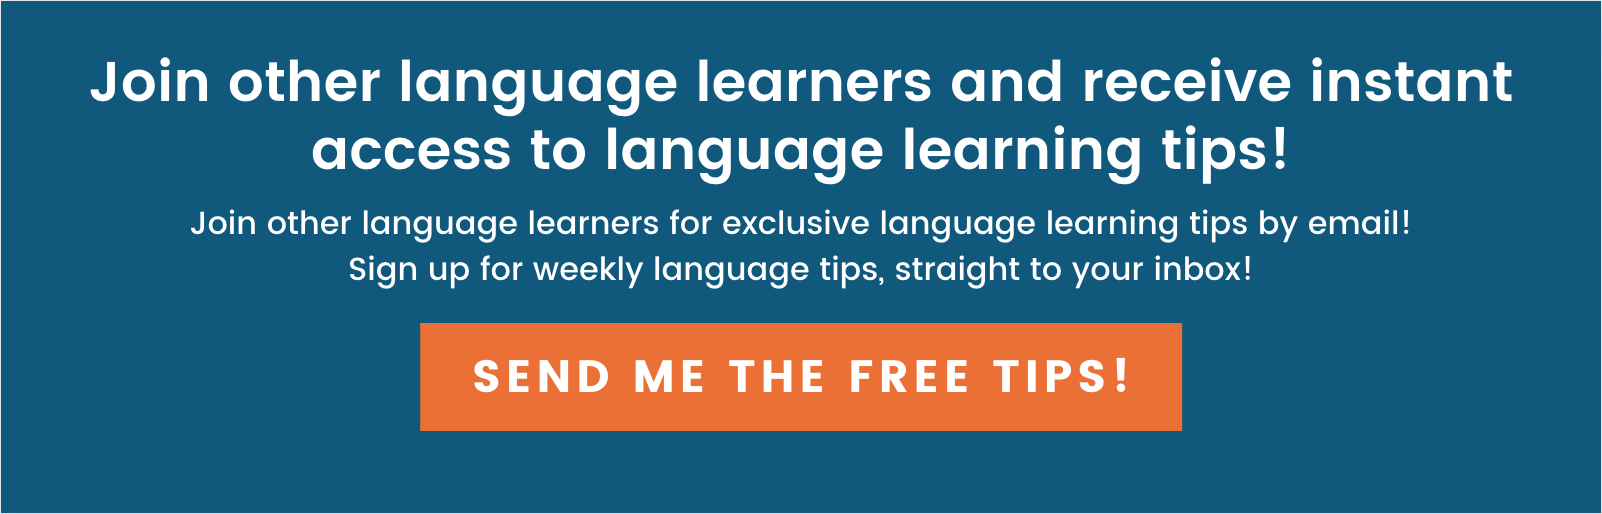 Is It Easier for Bilinguals to Learn Another Language? 6 Takeaways for  Aspiring Polyglots